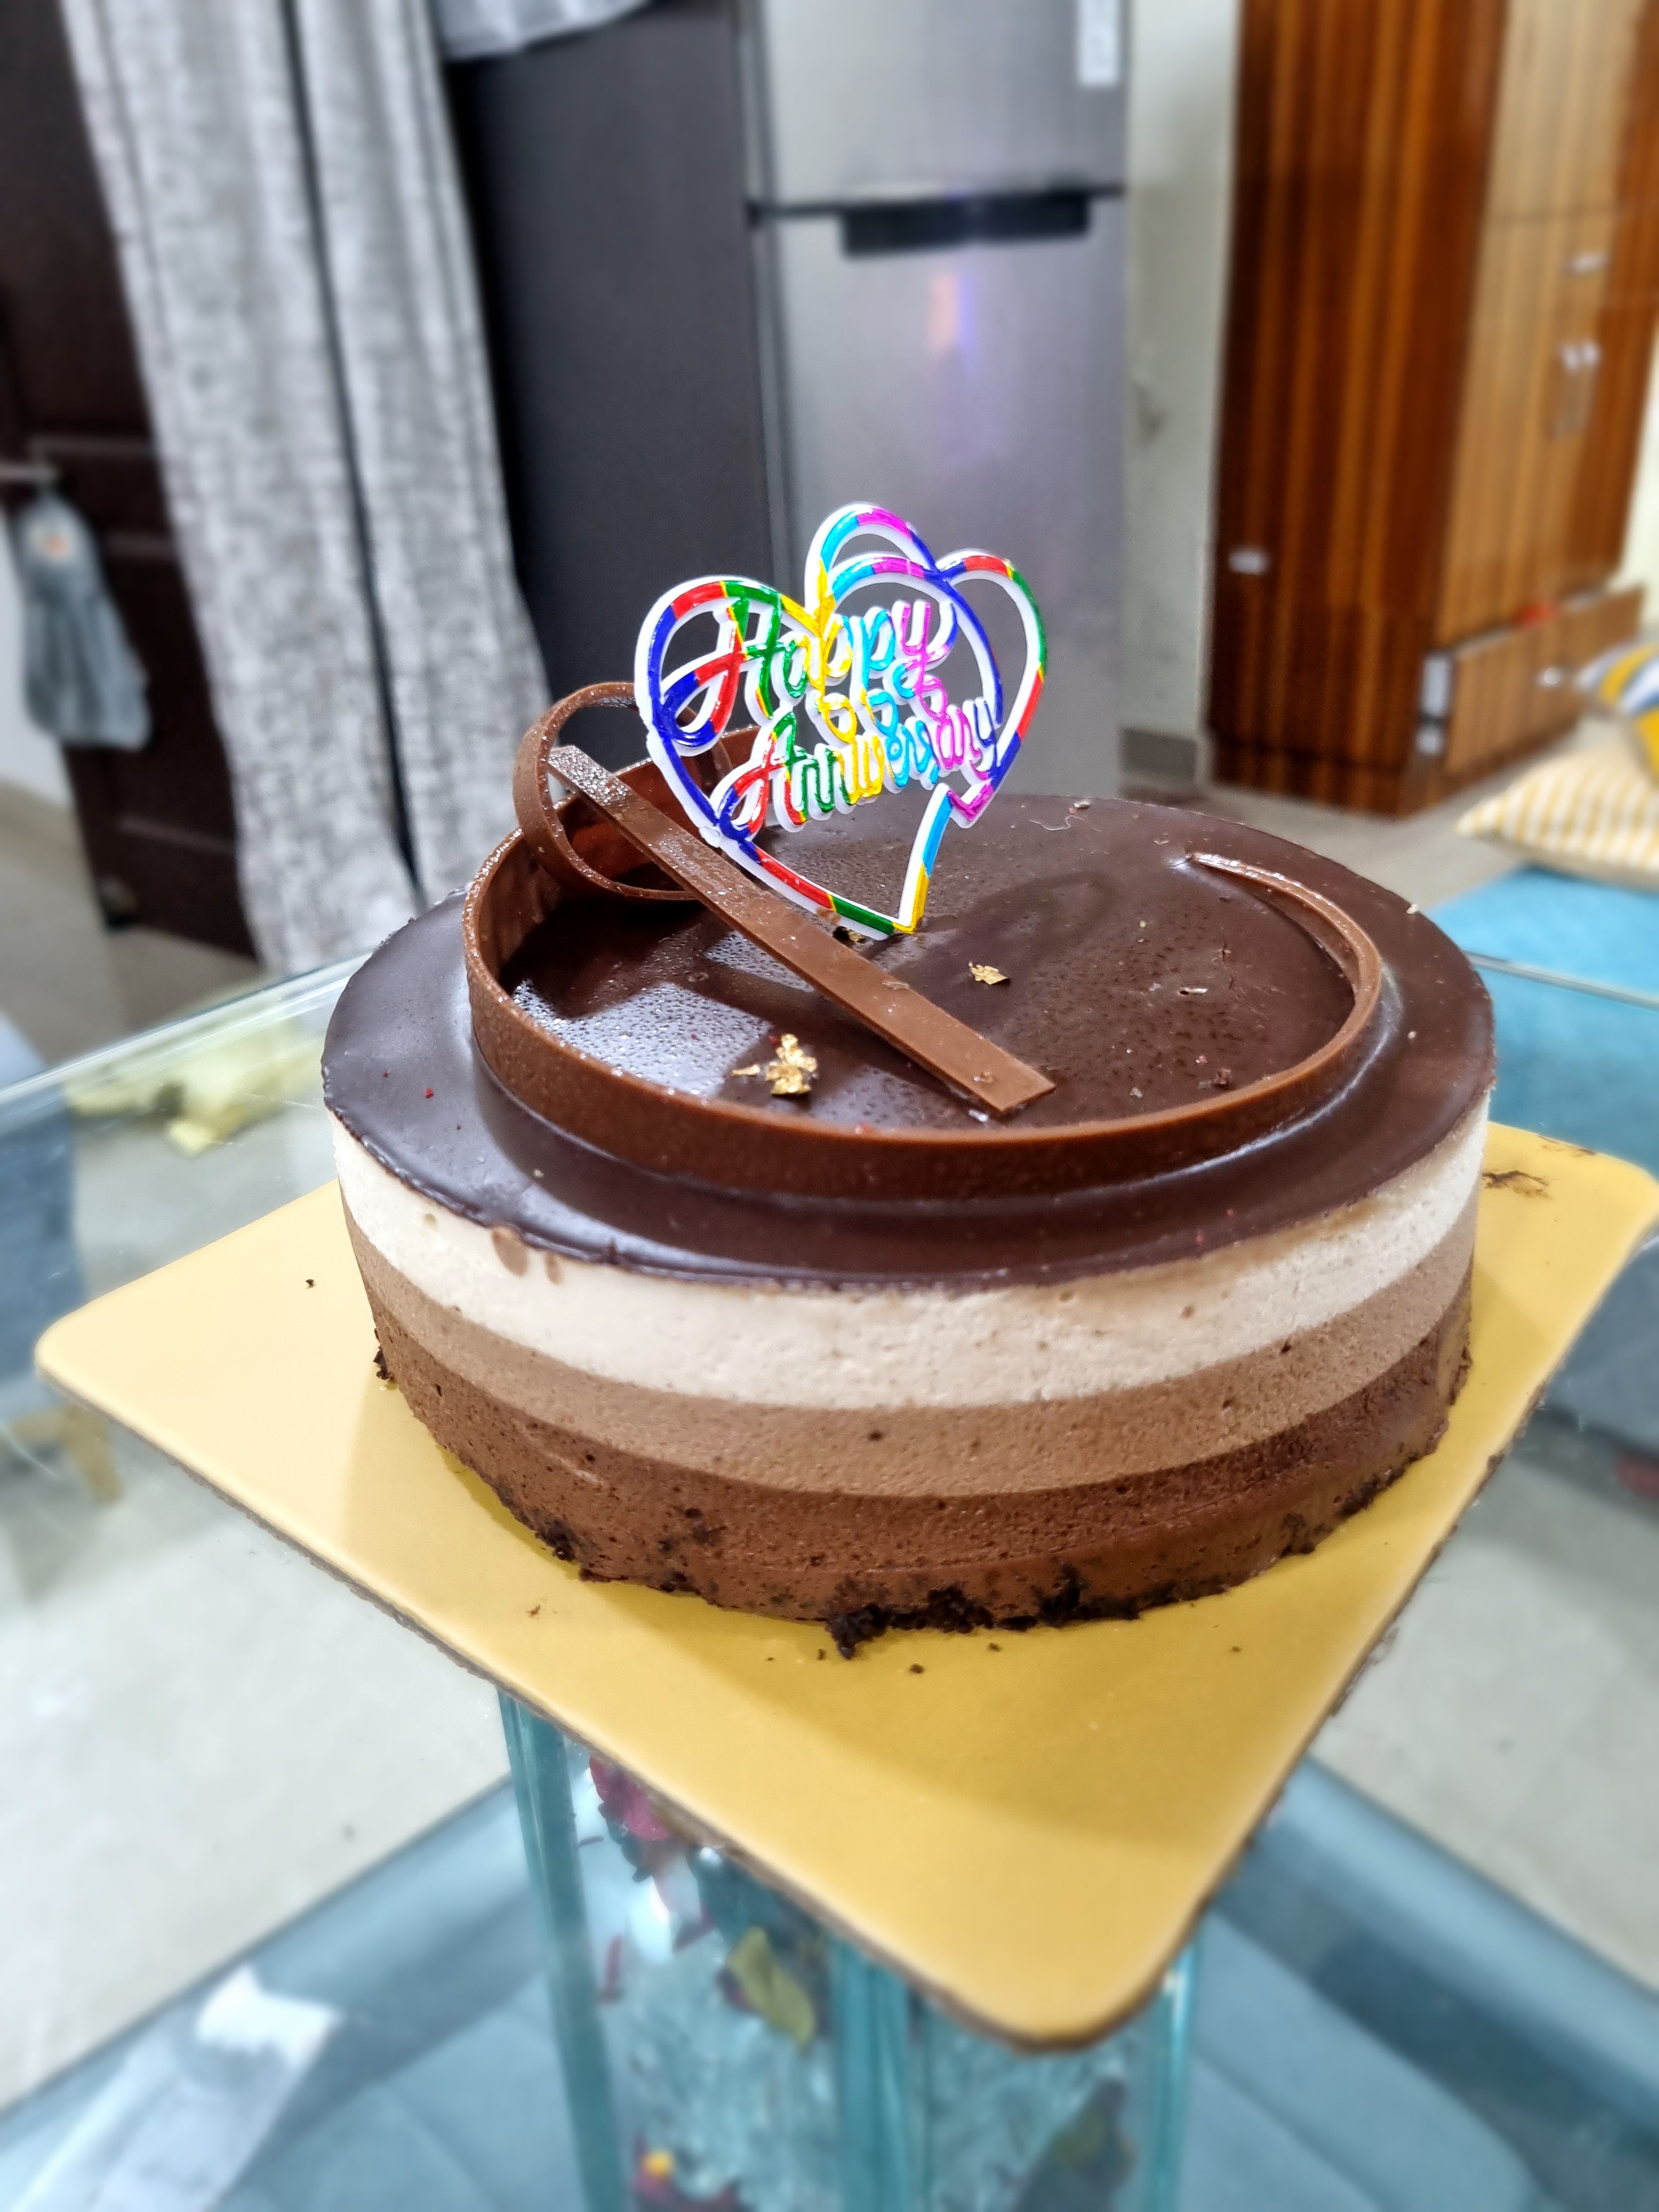 Cake2homes - We offer same day and midnight delivery, order and send cakes  to Bangalore. Express Cake Delivery in Bangalore. Send Cake in Bangalore,  Send Flowers in Bangalore, Send Gifts in Bangalore!